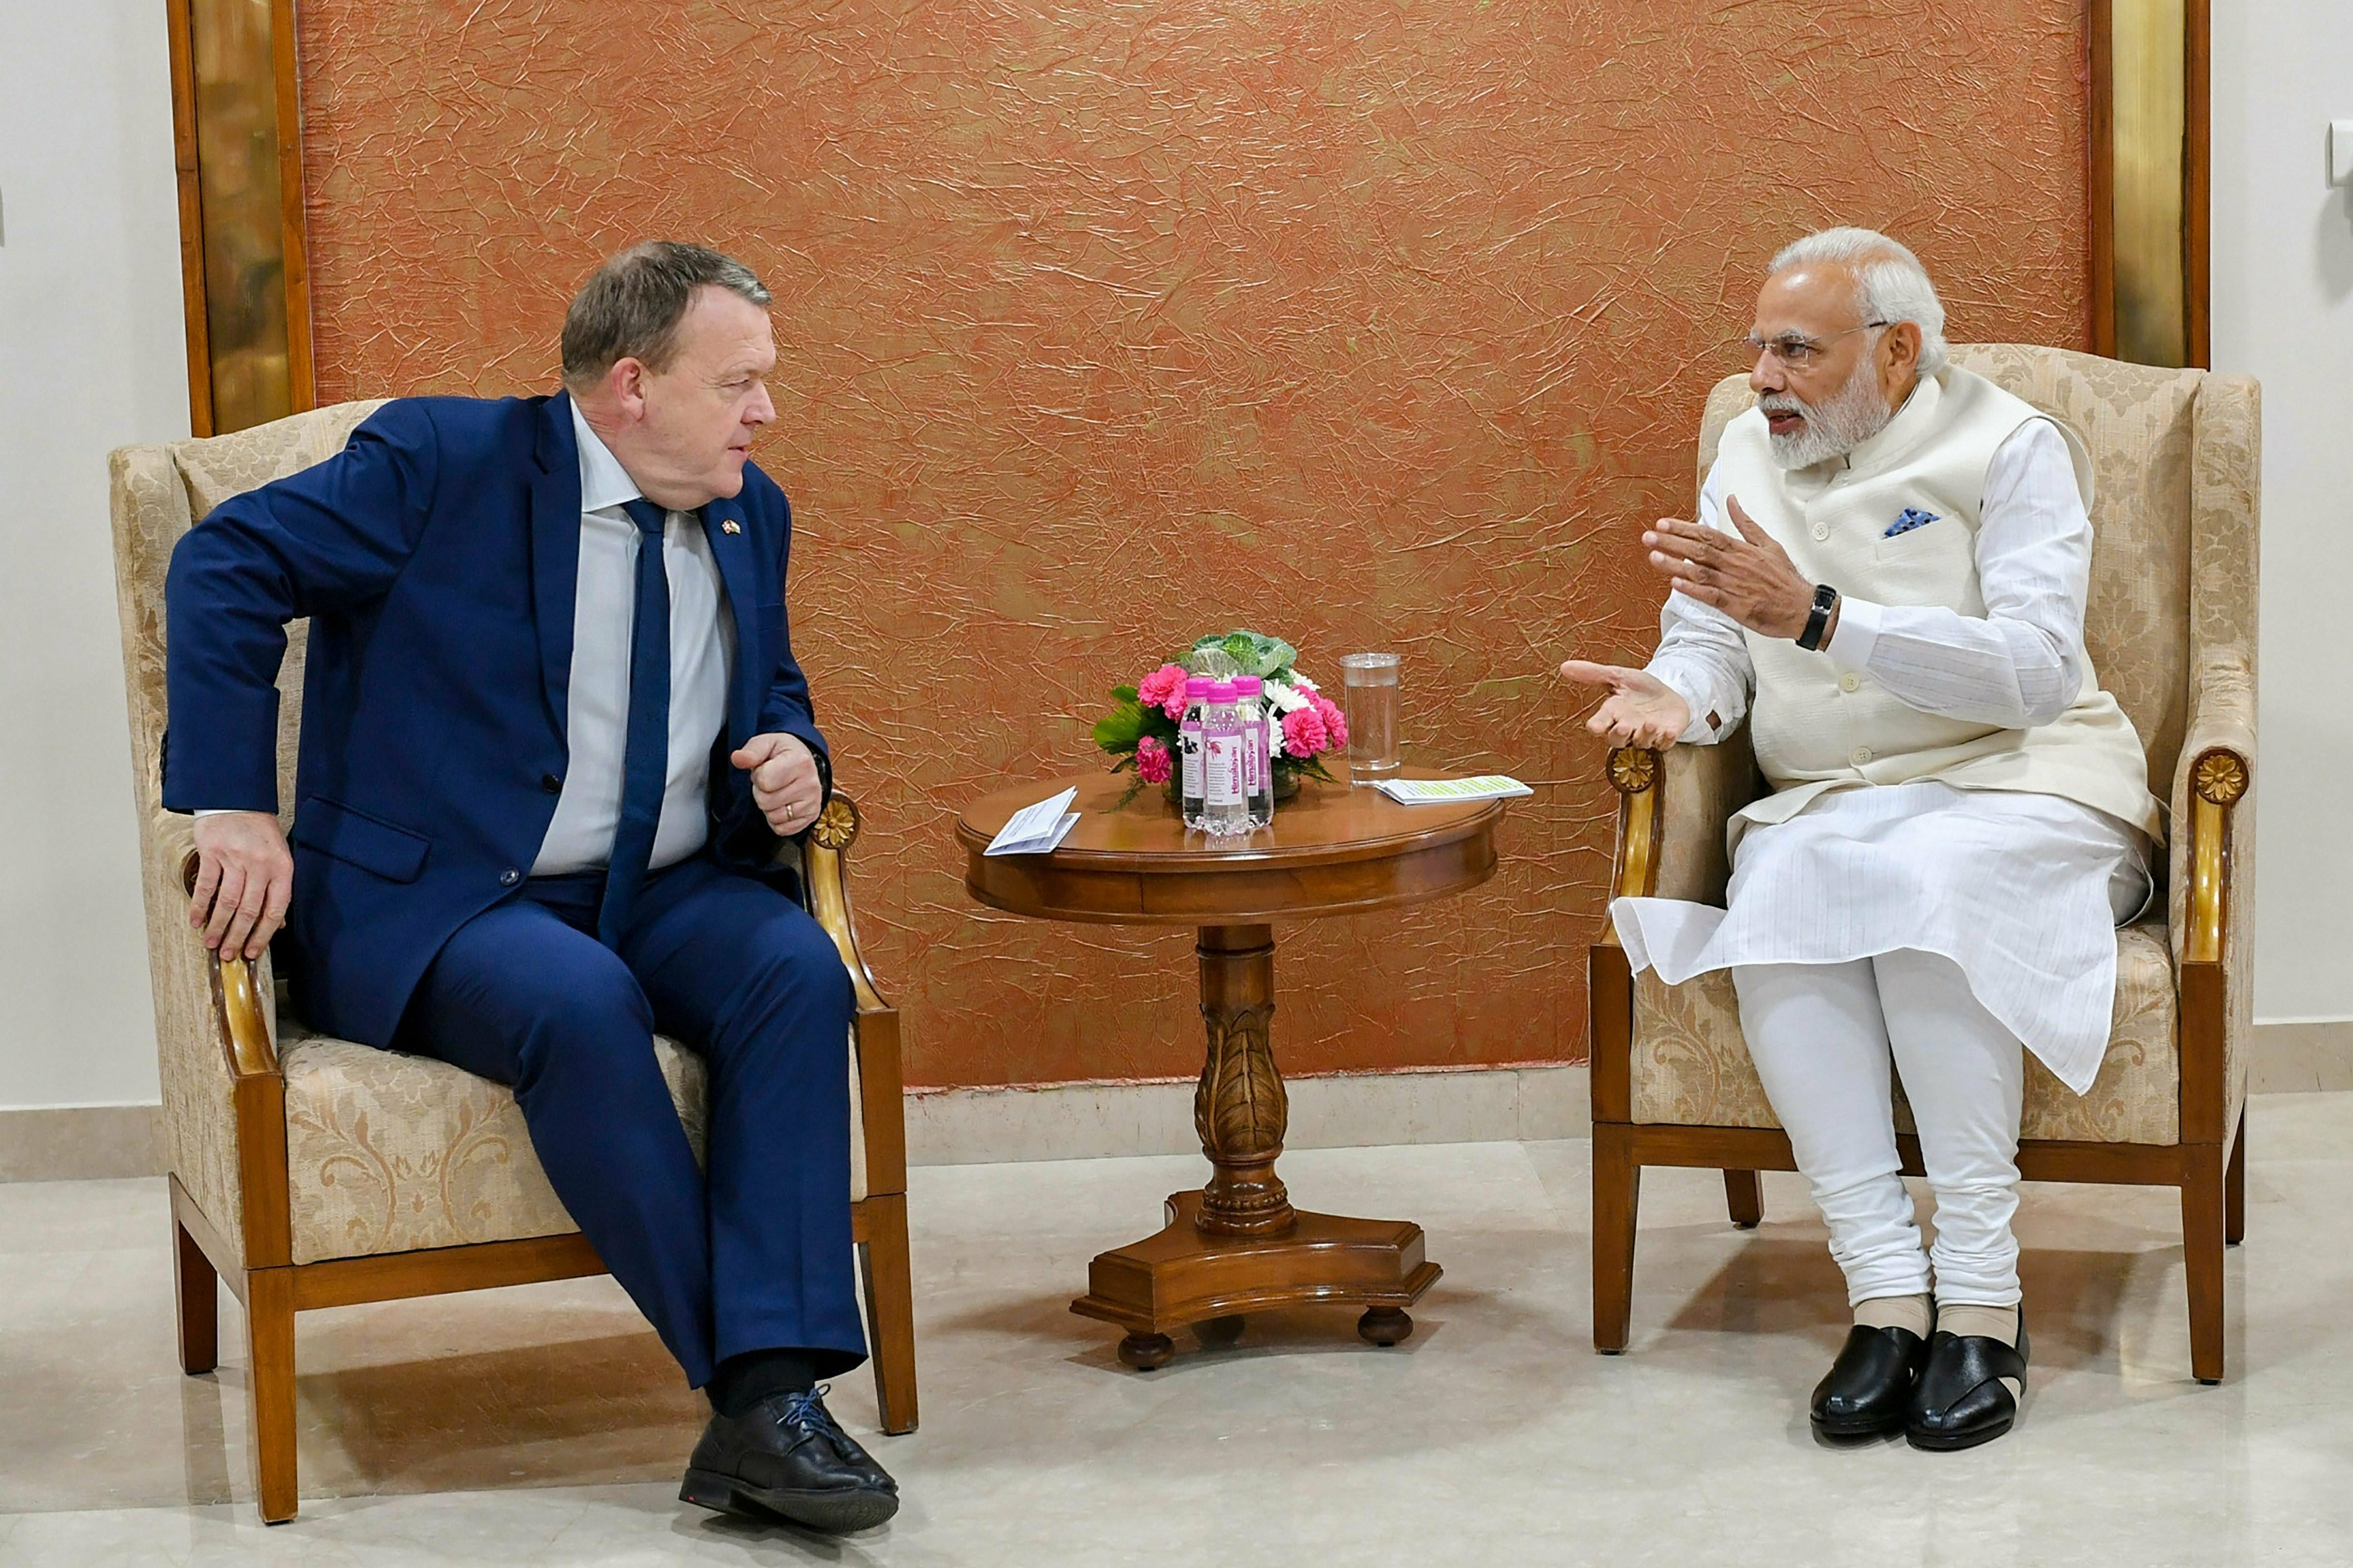 Prime Minister Narendra Modi during a meeting with his Danish counterpart Lars Lokke Rasmussen on the sidelines of 'Vibrant Gujarat', in Gandhinagar - PTI